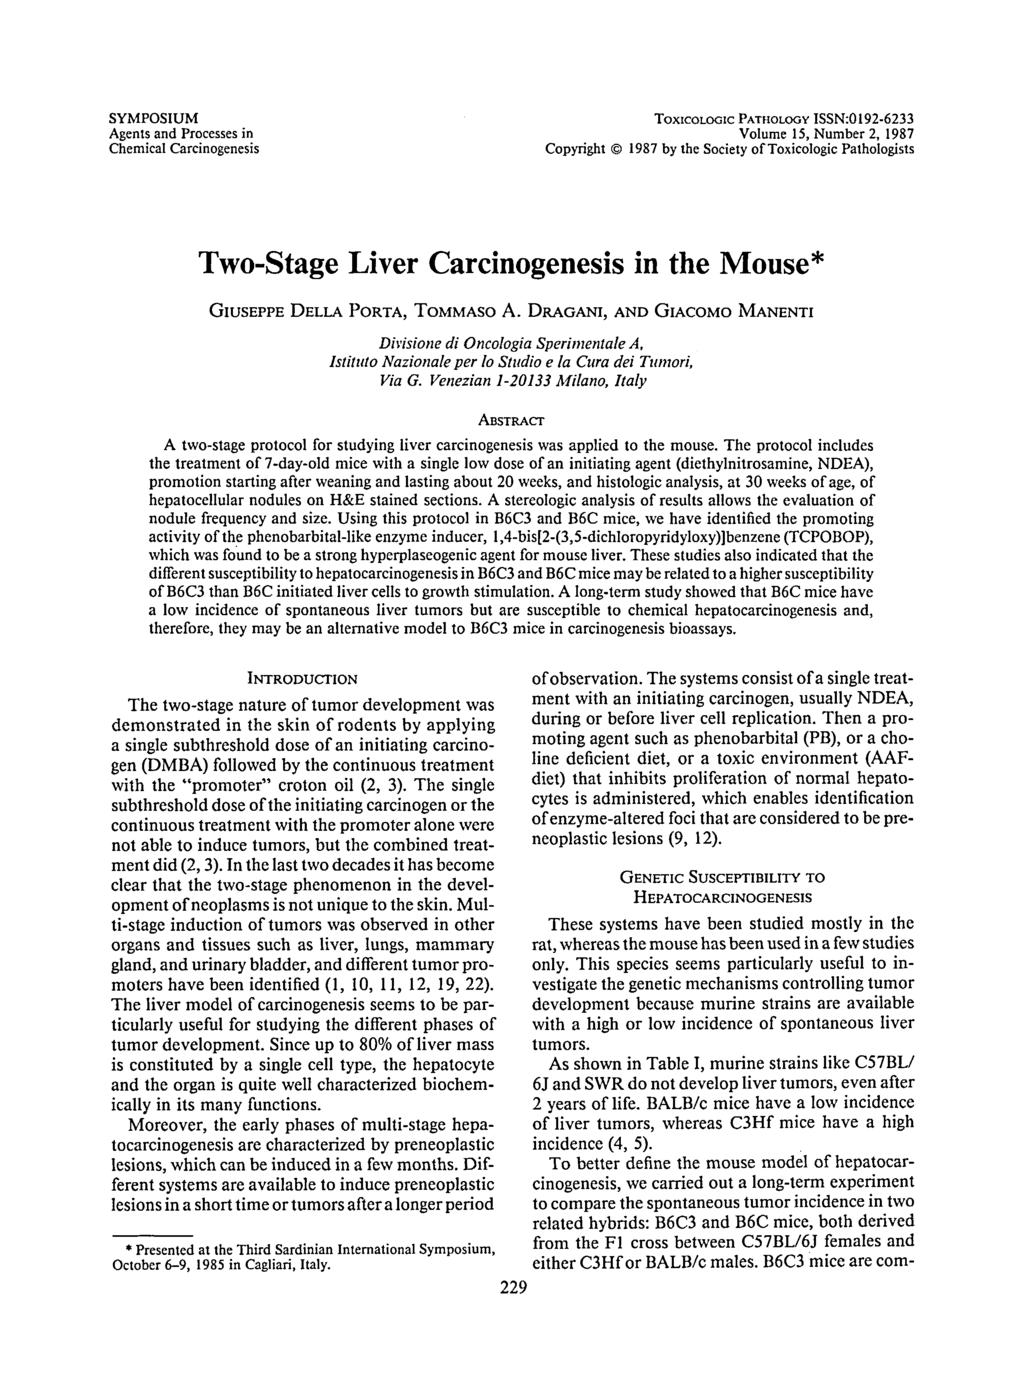 SYMPOSIUM Agents and Processes in Chemical Carcinogenesis TOXICOLOGIC PATHOLOGY ISSN:0192-6233 Volume 15, Number 2, 1987 Copyright 0 1987 by the Society of Toxicologic Pathologists Two-Stage Liver